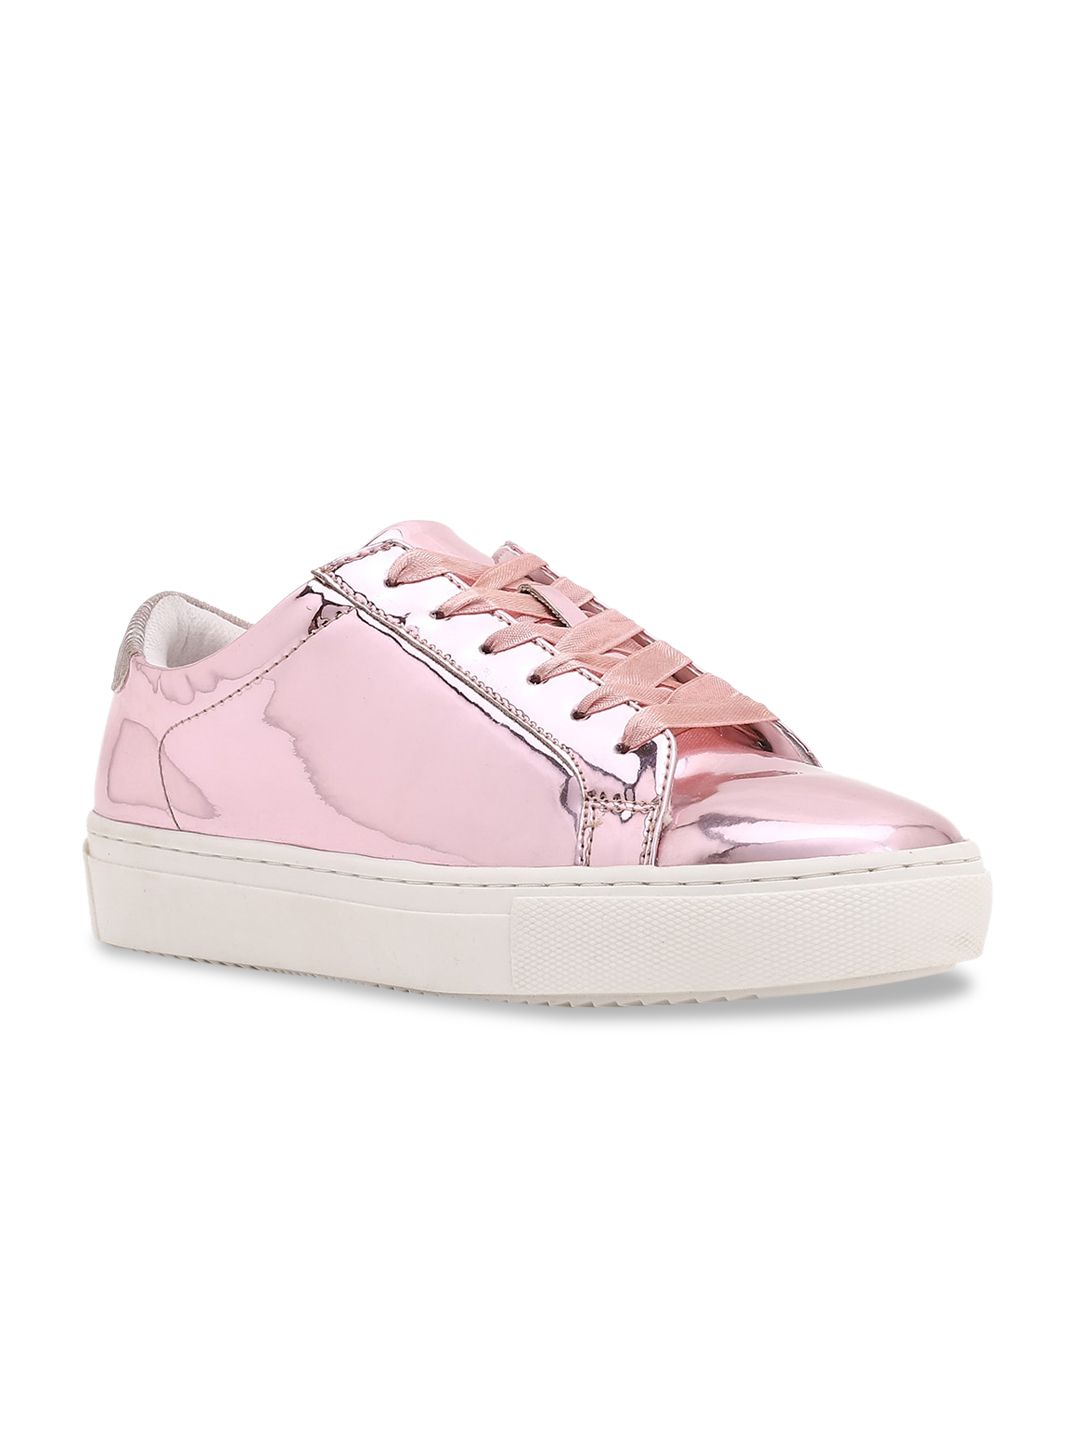 FOREVER 21 Women Purple Colourblocked PU Sneakers Price in India